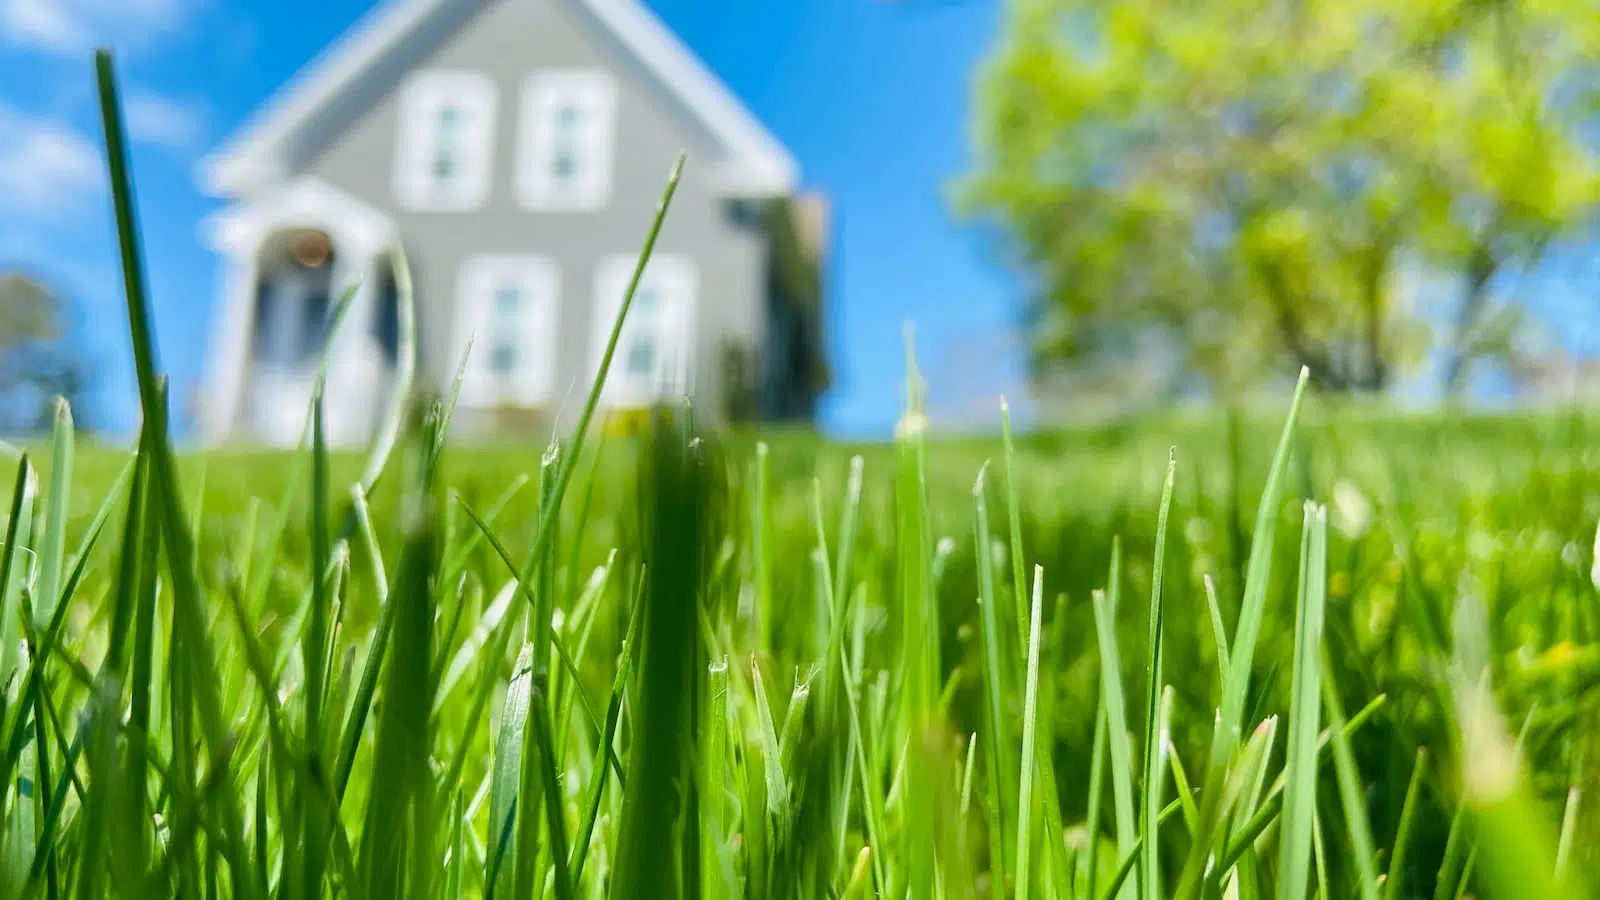 white and blue house in green grass field